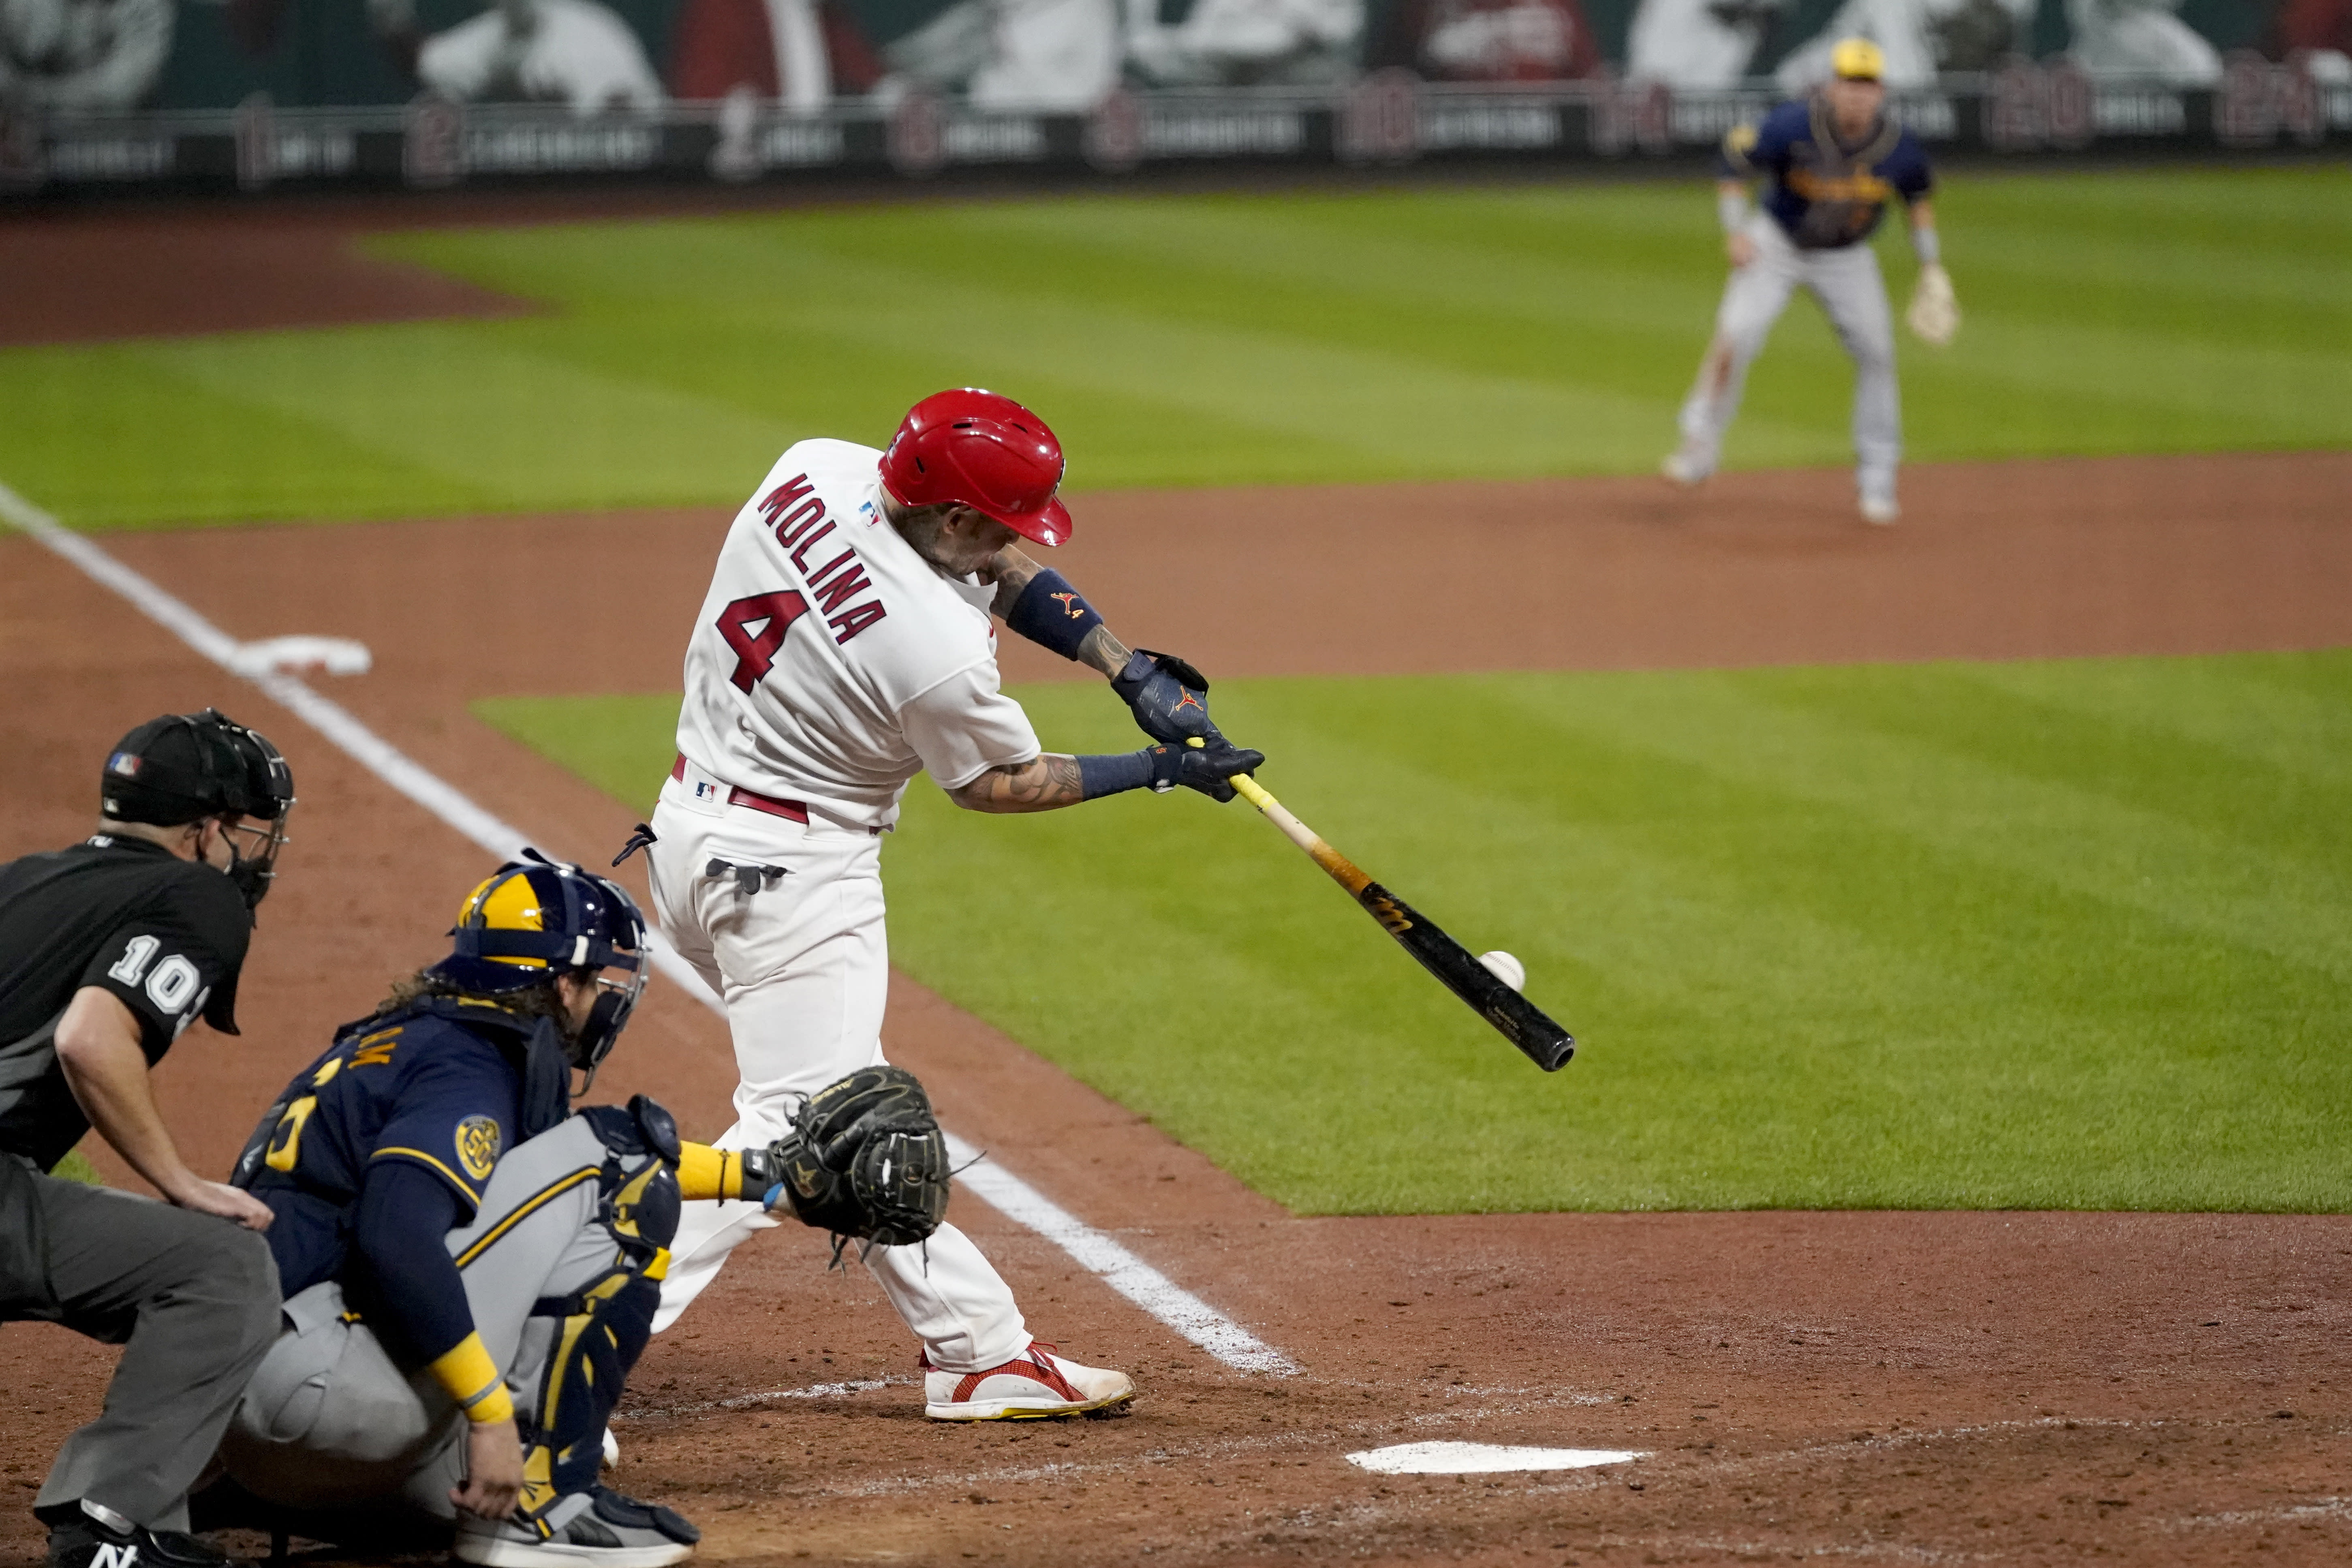 Molina leads Cards over Brewers 4-2 to open key 5-game set